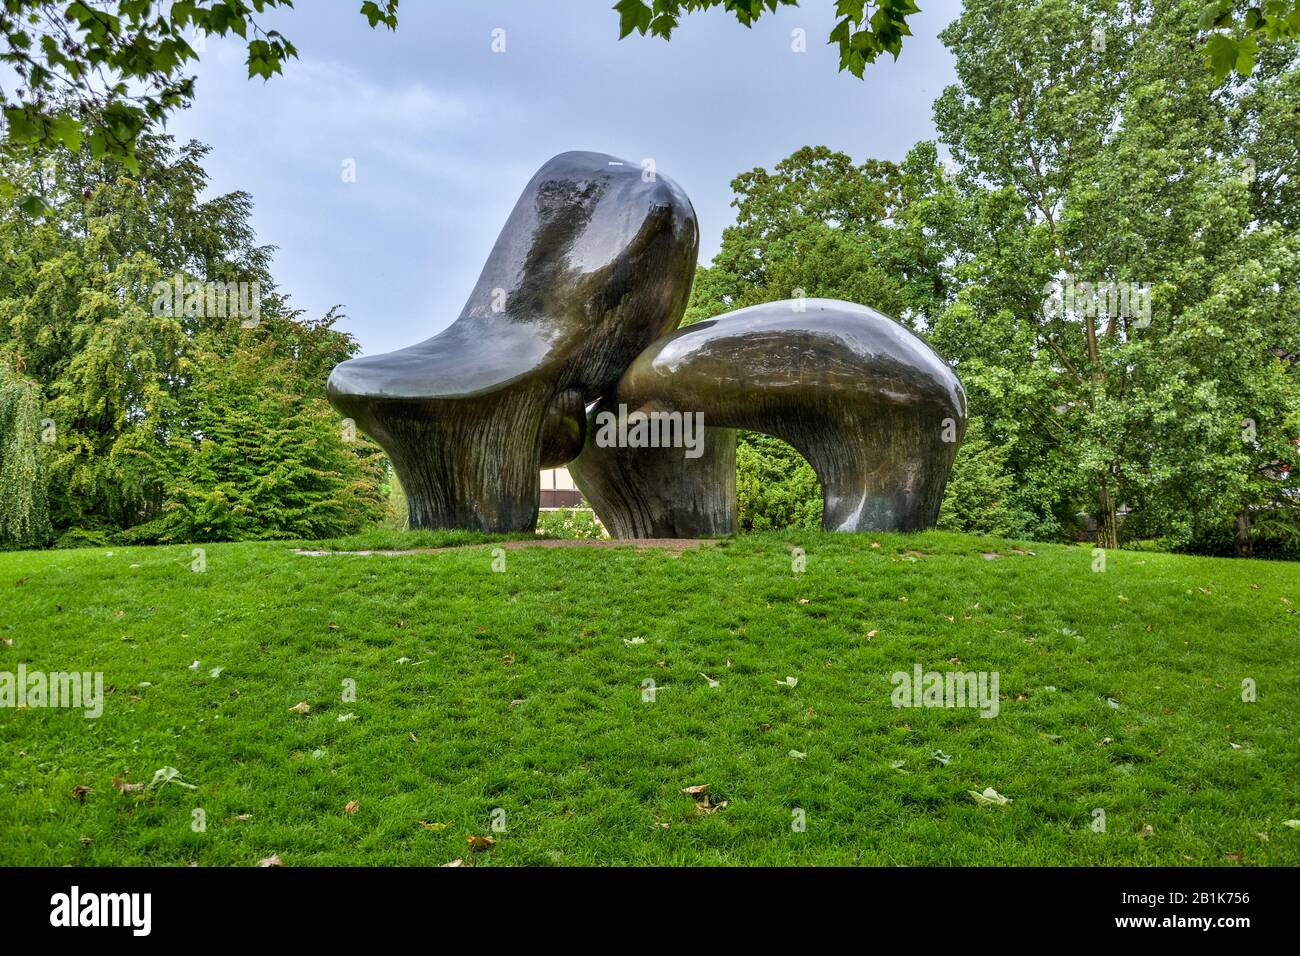 Zurich, Switzerland – June 25, 2016. Sheep Piece sculpture by Henry Moore, dating from 1971-72, in Zurich. The sculpture is placed at Seepromenade in Stock Photo